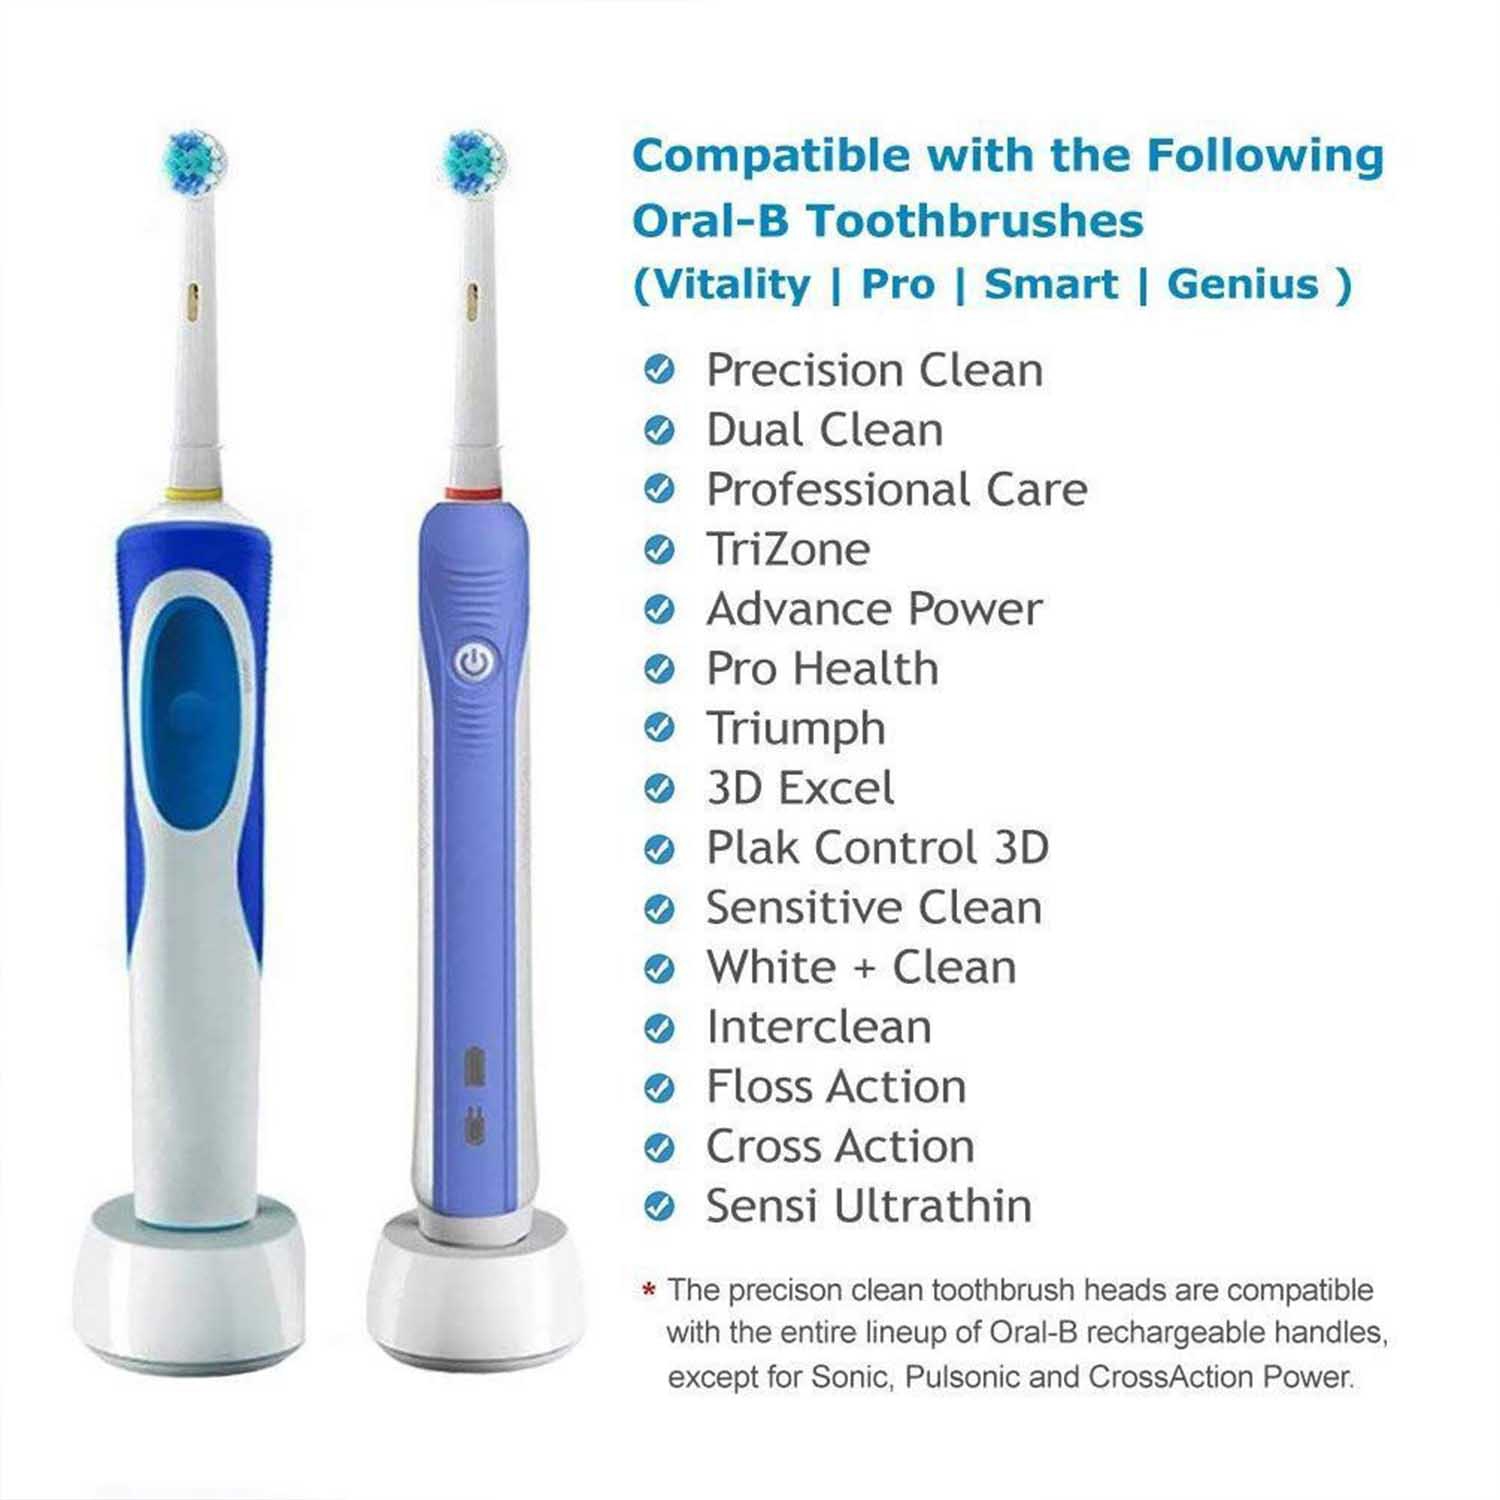 Best Buy: Oral-B Oral-B Triumph Toothbrush with SmartGuide Triumph